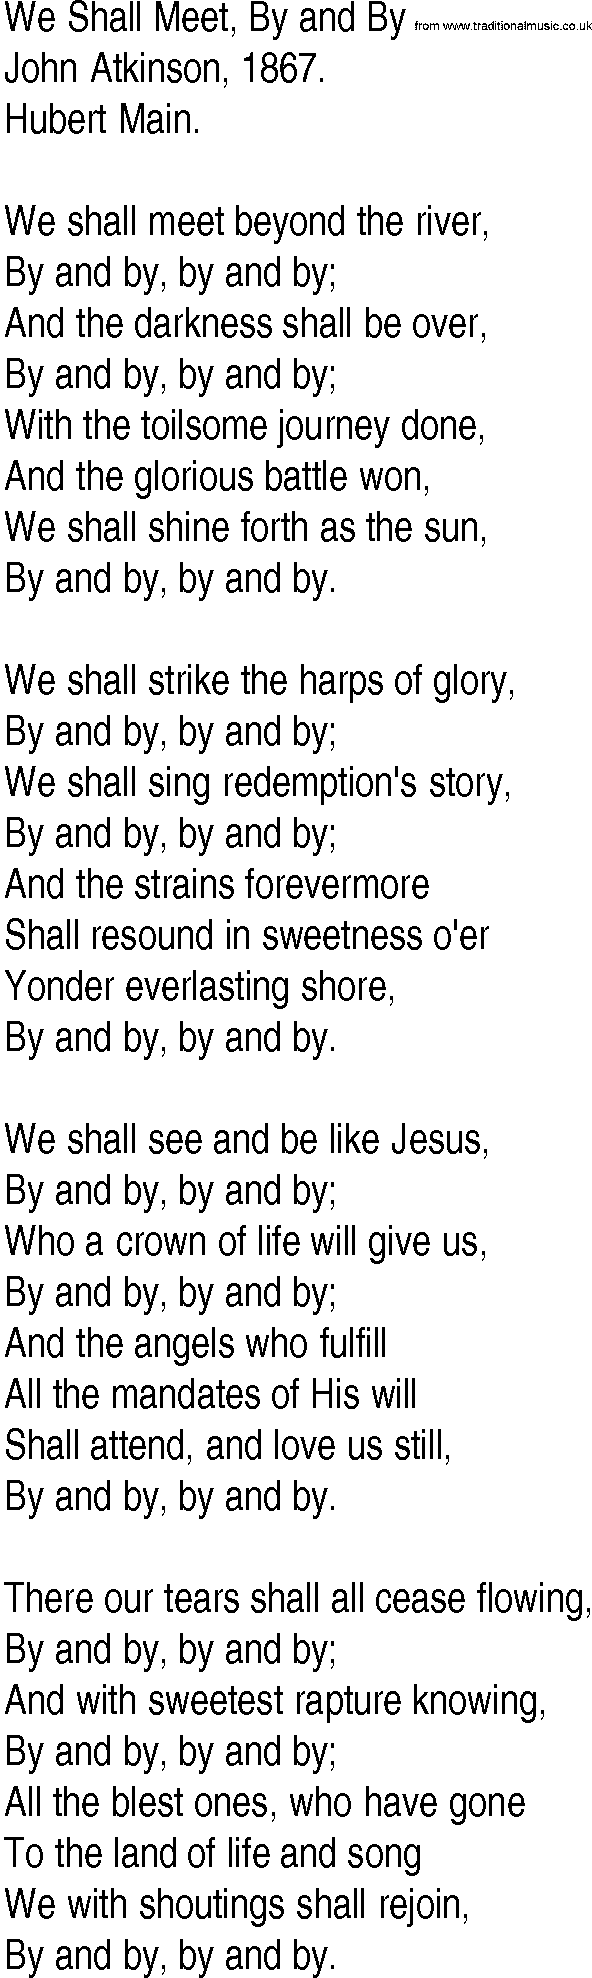 Hymn and Gospel Song: We Shall Meet, By and By by John Atkinson lyrics